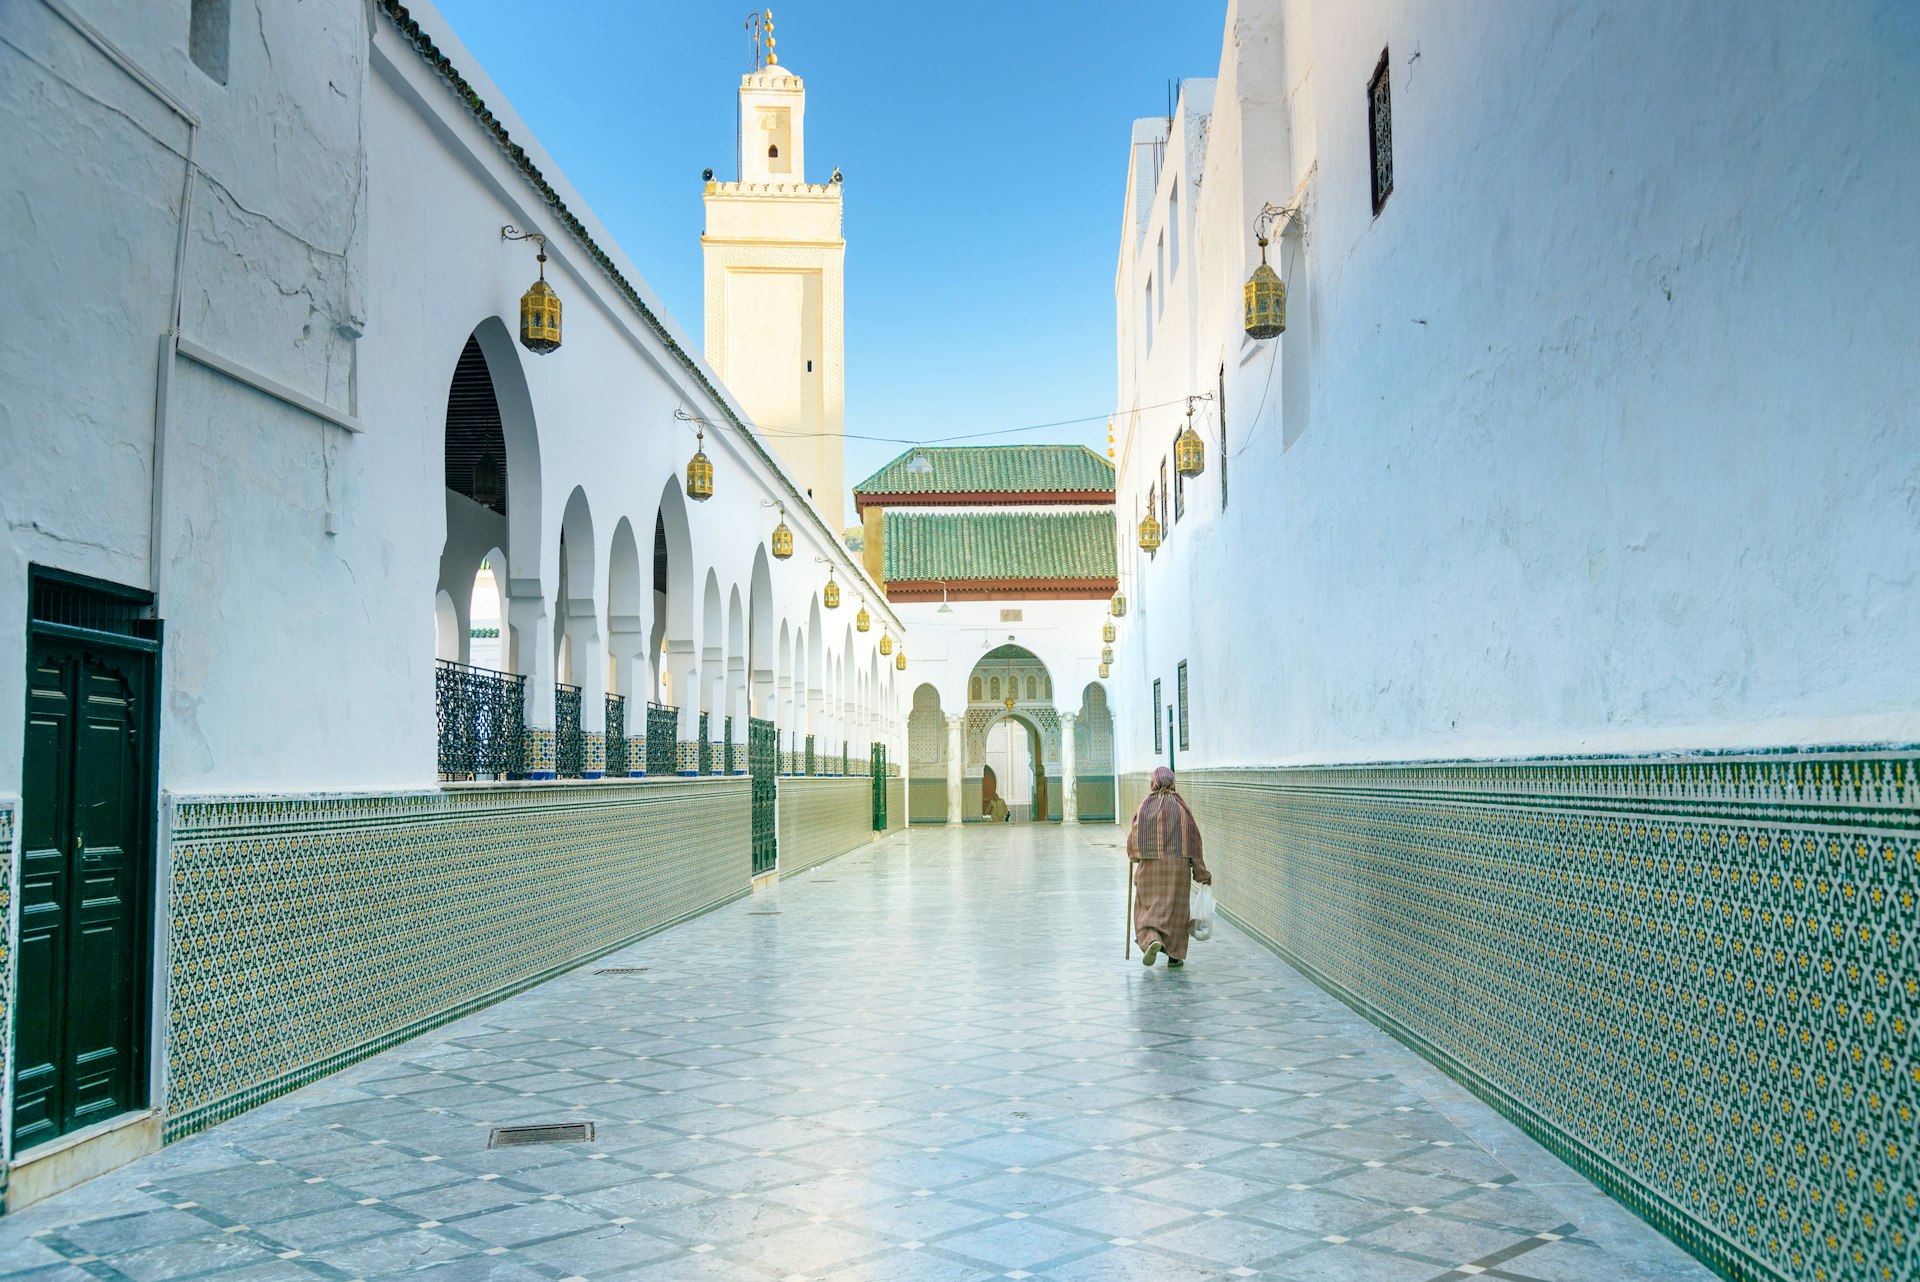 Person walking through narrow alleyway in Moulay Idriss, Morocco